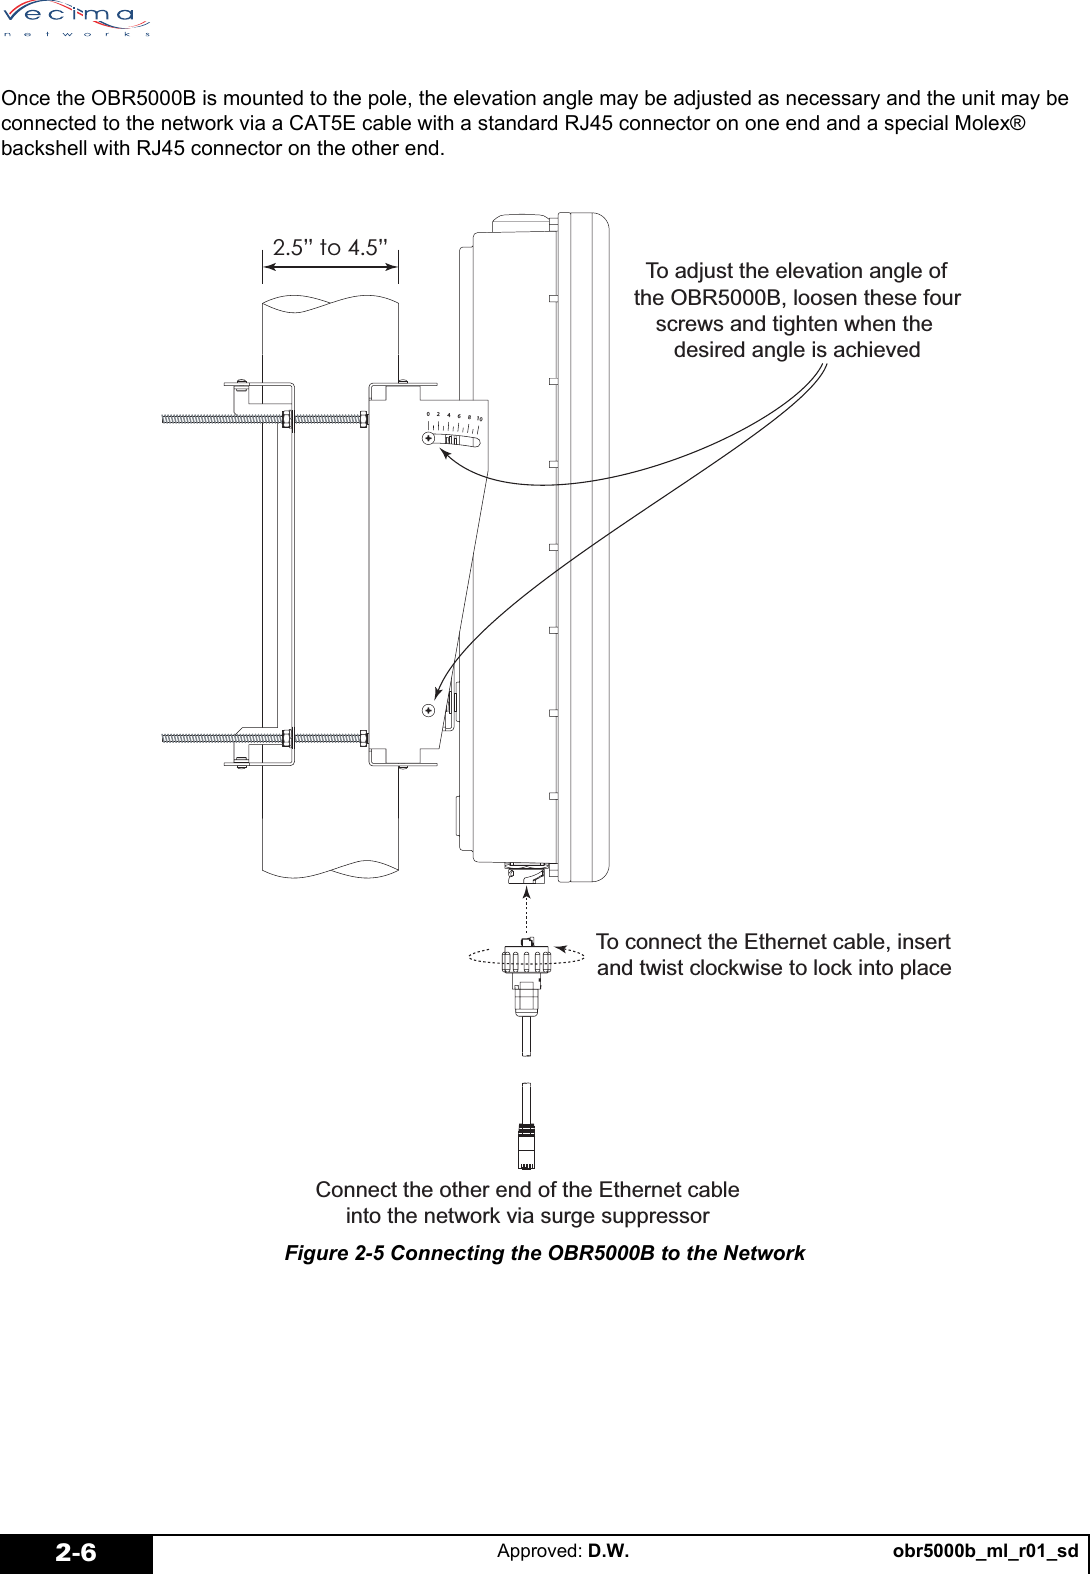 obr5000b_ml_r01_sdApproved: D.W.2-6Once the OBR5000B is mounted to the pole, the elevation angle may be adjusted as necessary and the unit may be connected to the network via a CAT5E cable with a standard RJ45 connector on one end and a special Molex®  backshell with RJ45 connector on the other end.Figure 2-5 Connecting the OBR5000B to the NetworkµWRµ7RFRQQHFWWKH(WKHUQHWFDEOHLQVHUWDQGWZLVWFORFNZLVHWRORFNLQWRSODFH&amp;RQQHFWWKHRWKHUHQGRIWKH(WKHUQHWFDEOHLQWRWKHQHWZRUNYLDVXUJHVXSSUHVVRU7RDGMXVWWKHHOHYDWLRQDQJOHRIWKH2%5%ORRVHQWKHVHIRXUVFUHZVDQGWLJKWHQZKHQWKHGHVLUHGDQJOHLVDFKLHYHG